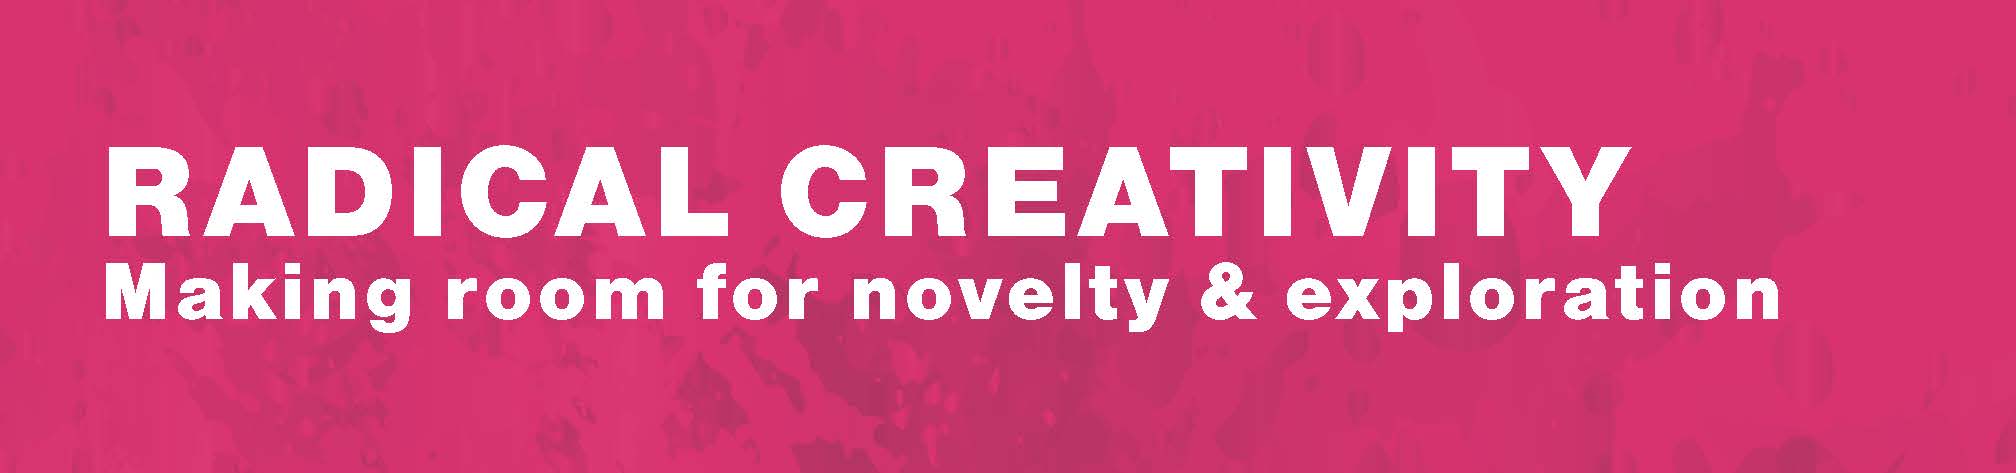 Radical creativity: Making room for novelty and exploration